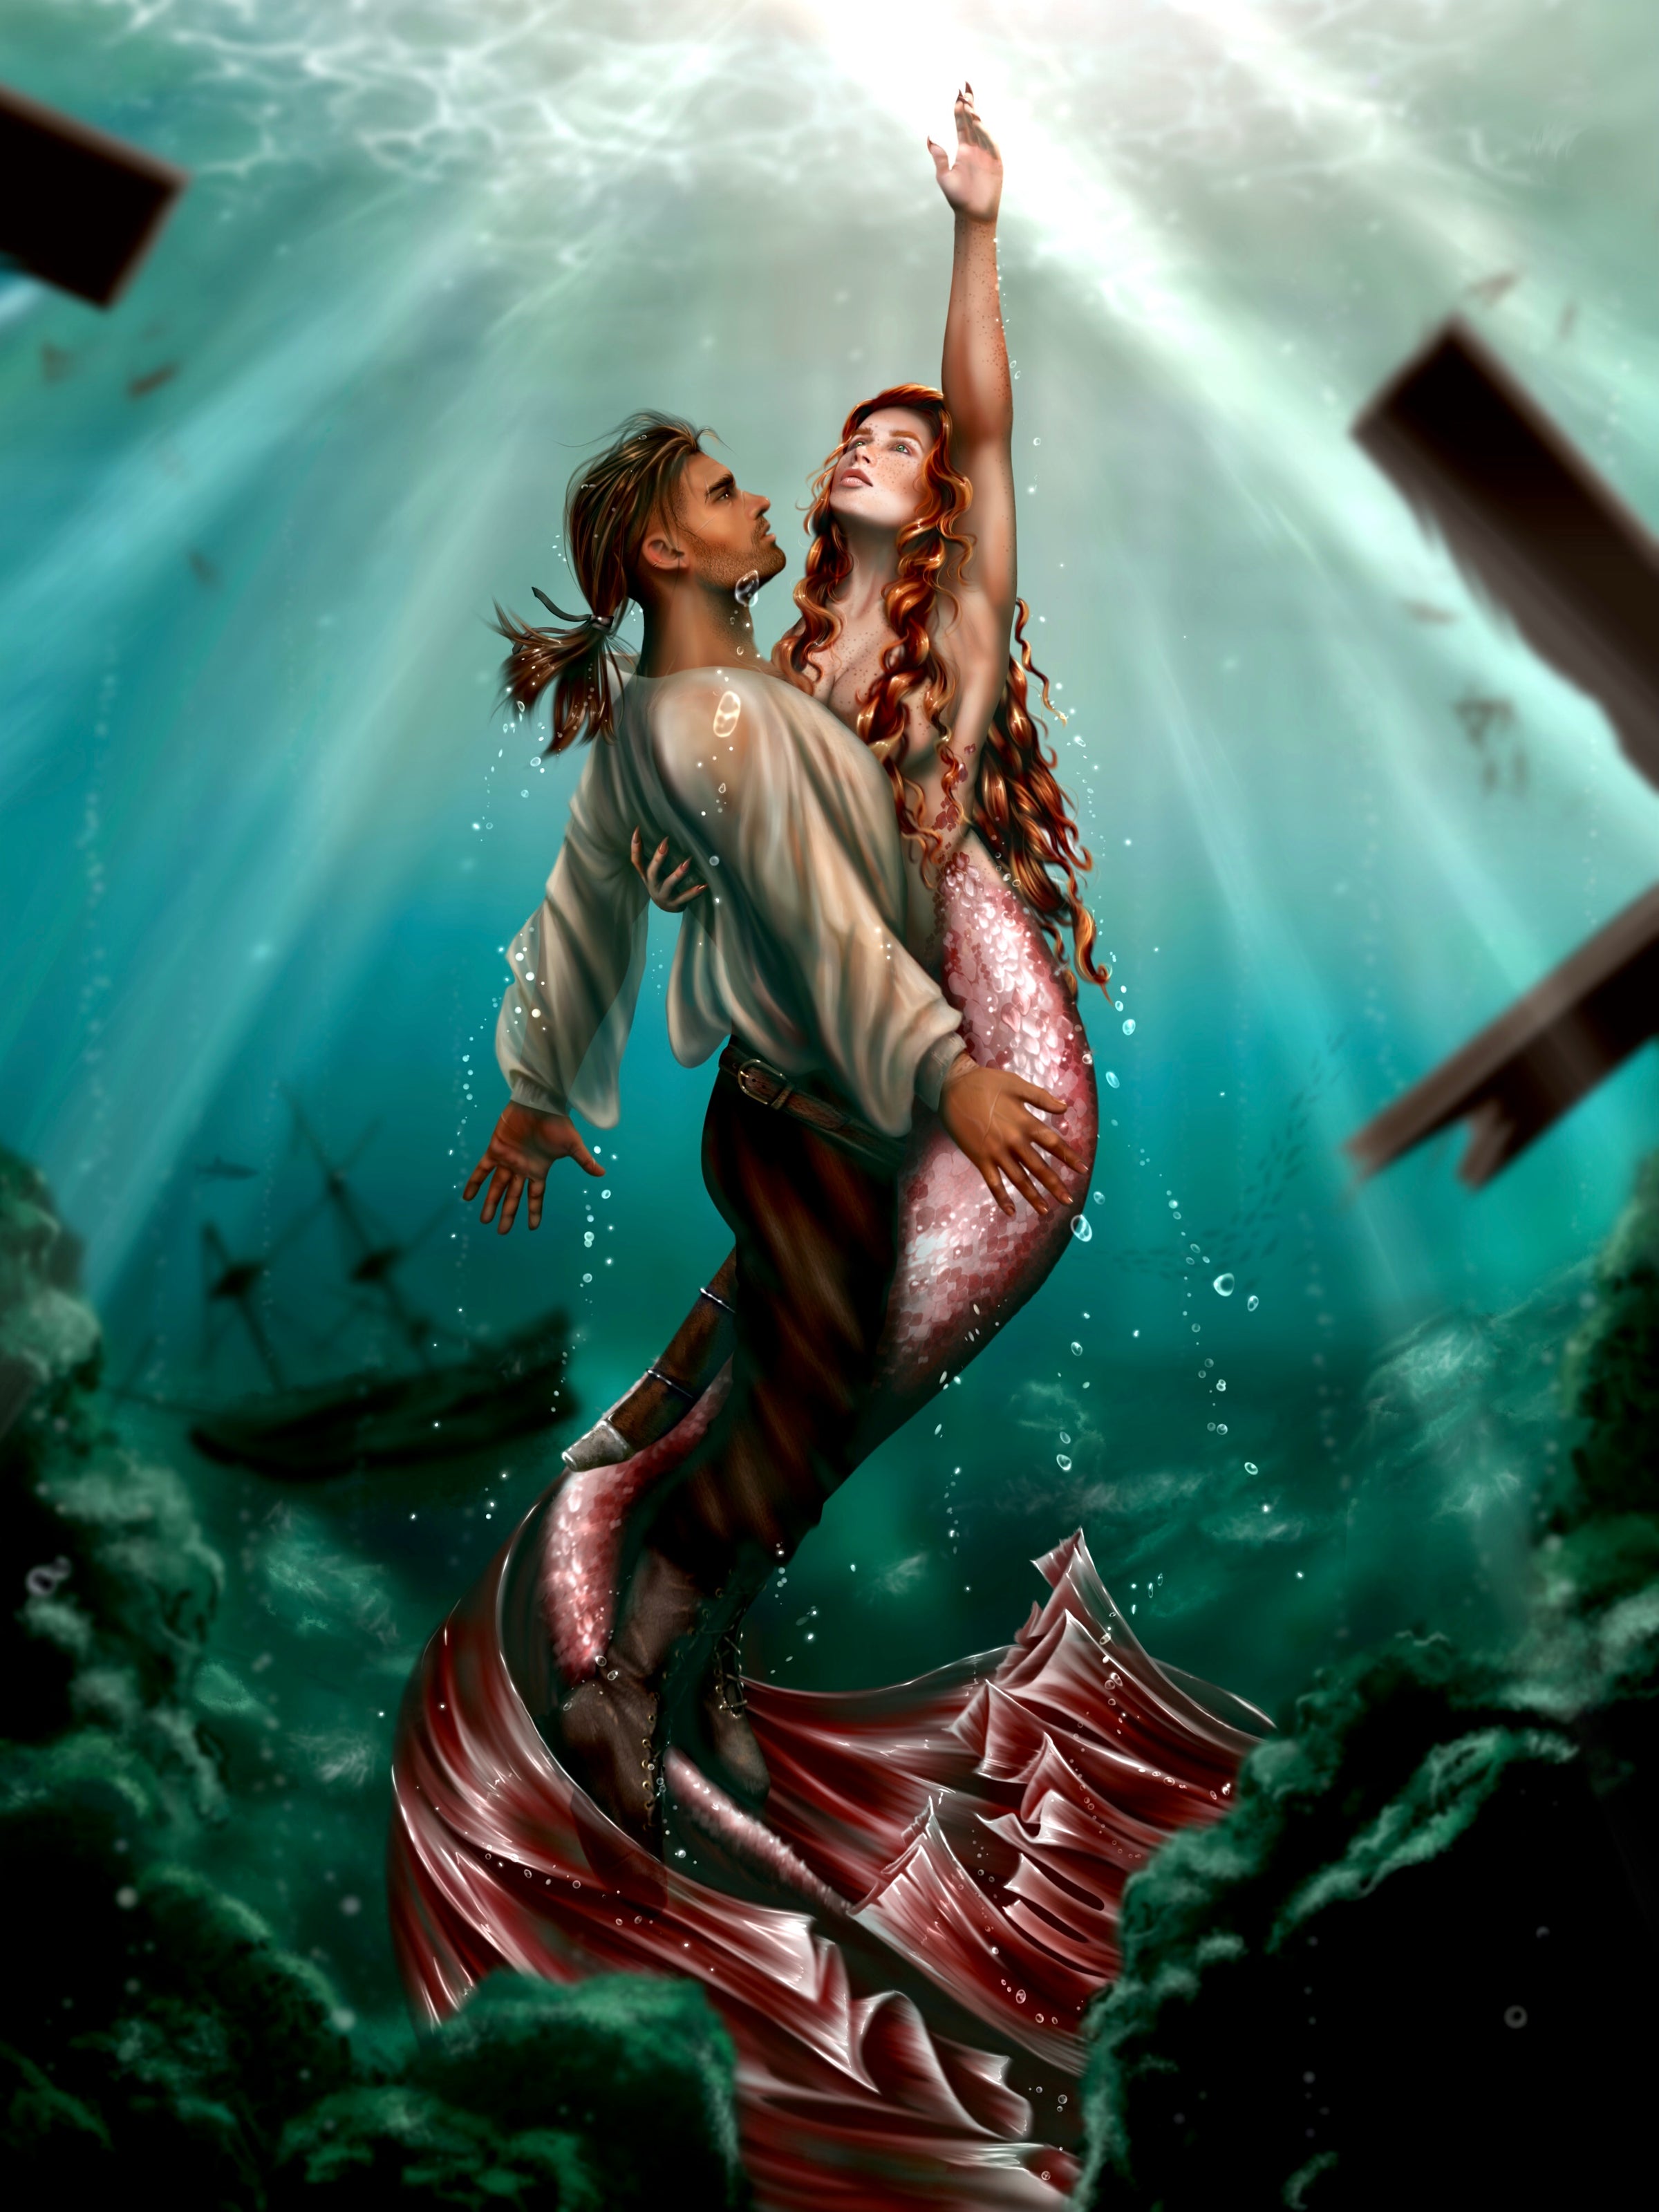 digital painting of underwater scene. focal point is a man with shoulder length brown hair in a ponytail, wearing boots, pants and a long sleeve shirt being pulled towards the surface of the water by a mermaid with a red tail and long red hair. She is reaching toward the surface with one hand and holding him up with the other. The background is a shipwreck scene beneath the water. Art done by @theclever.crow on Instagram. Artwork is from The Syren's Mutiny by Jessica S. Taylor